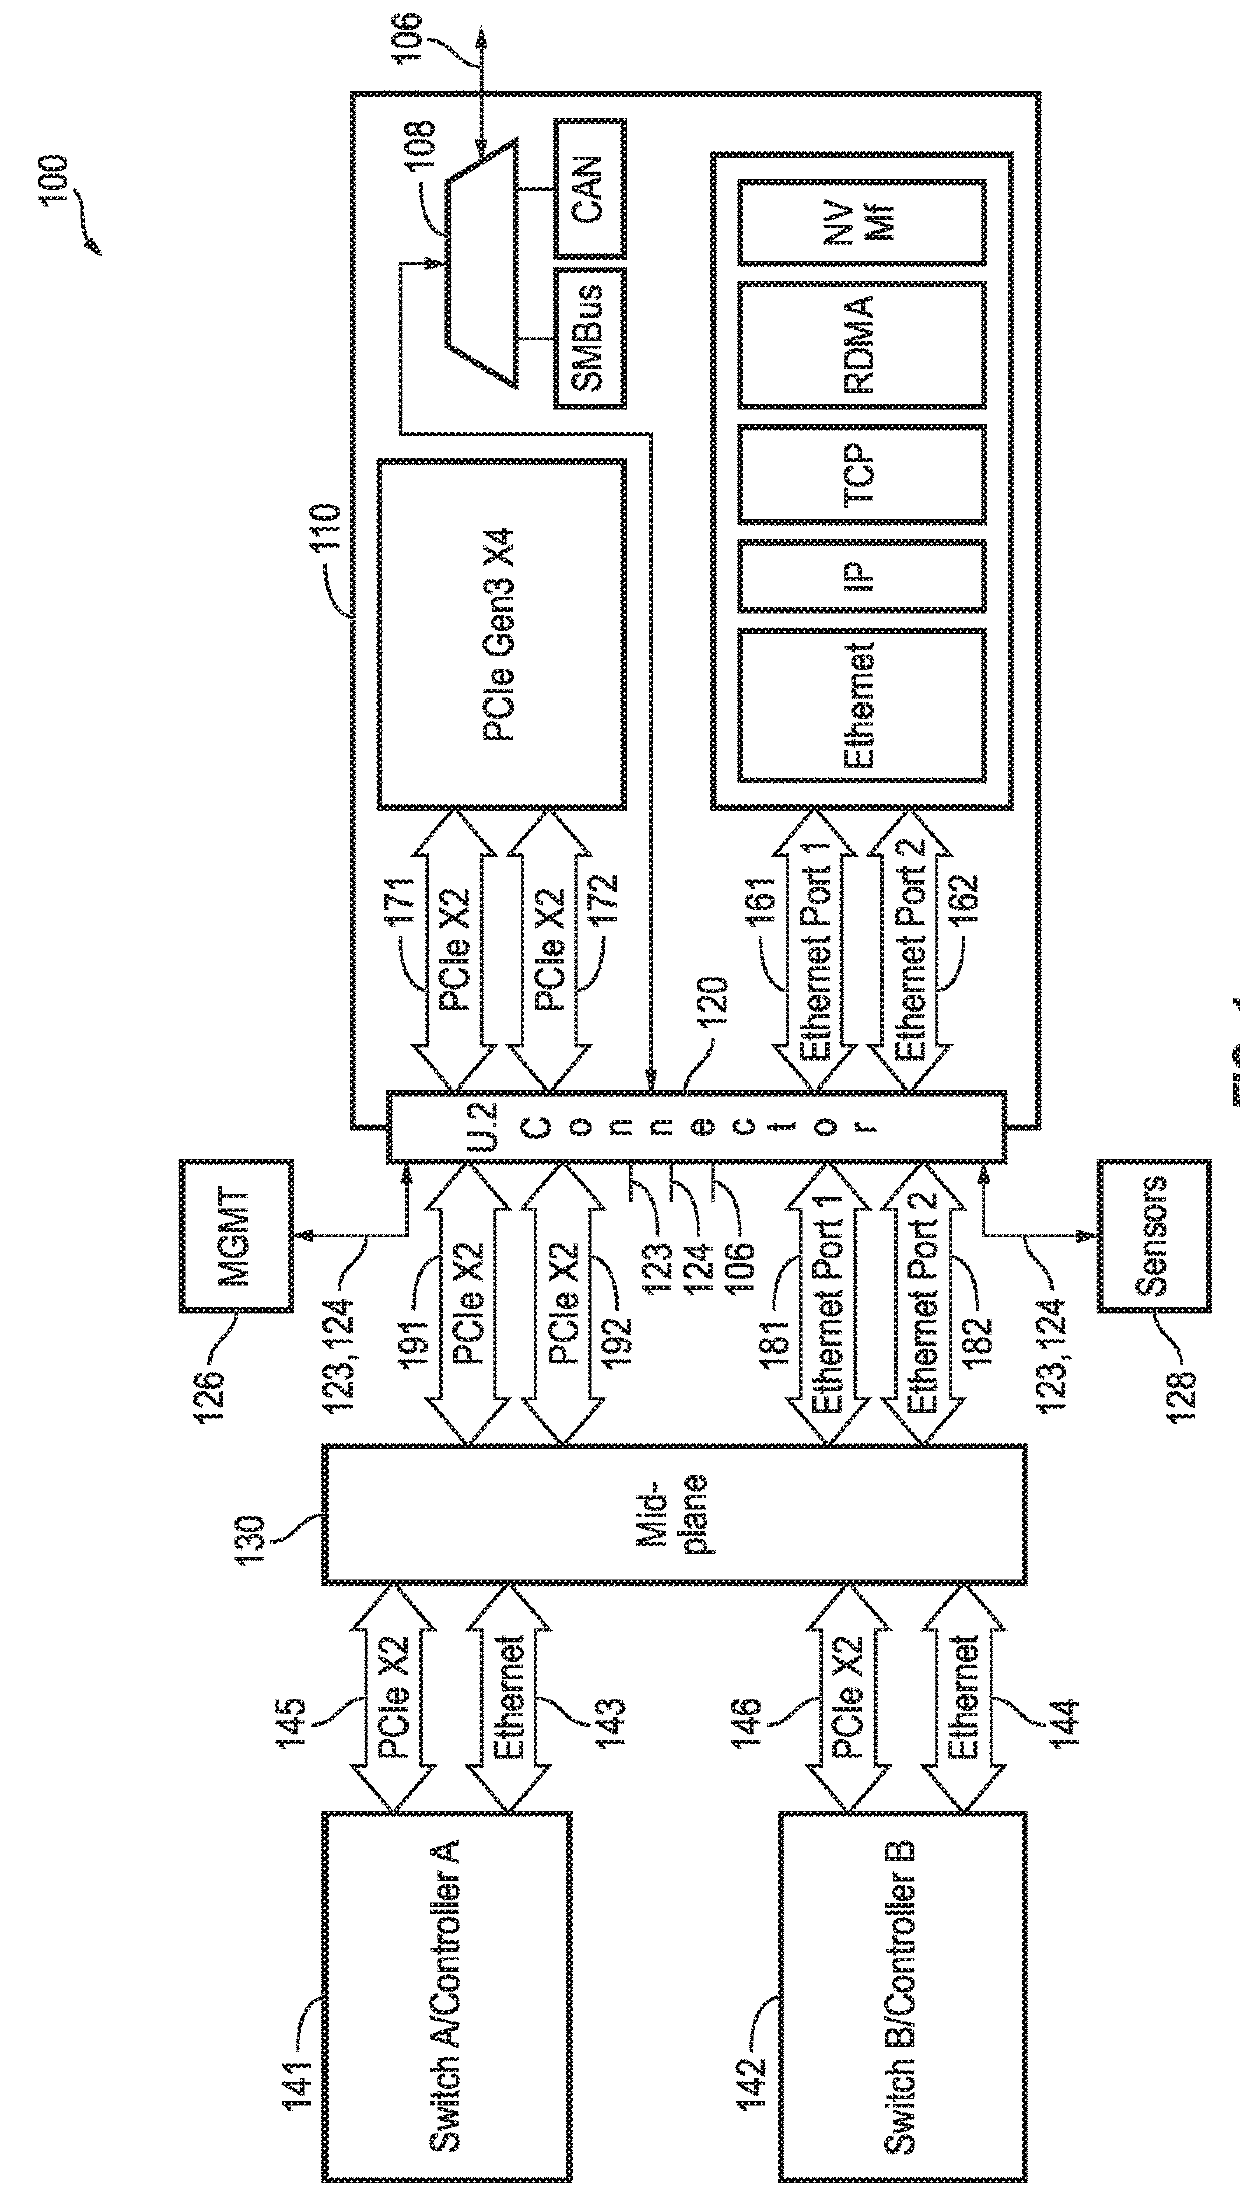 Multi-mode nvme over fabrics device for supporting can (controller area network) bus or smbus interface